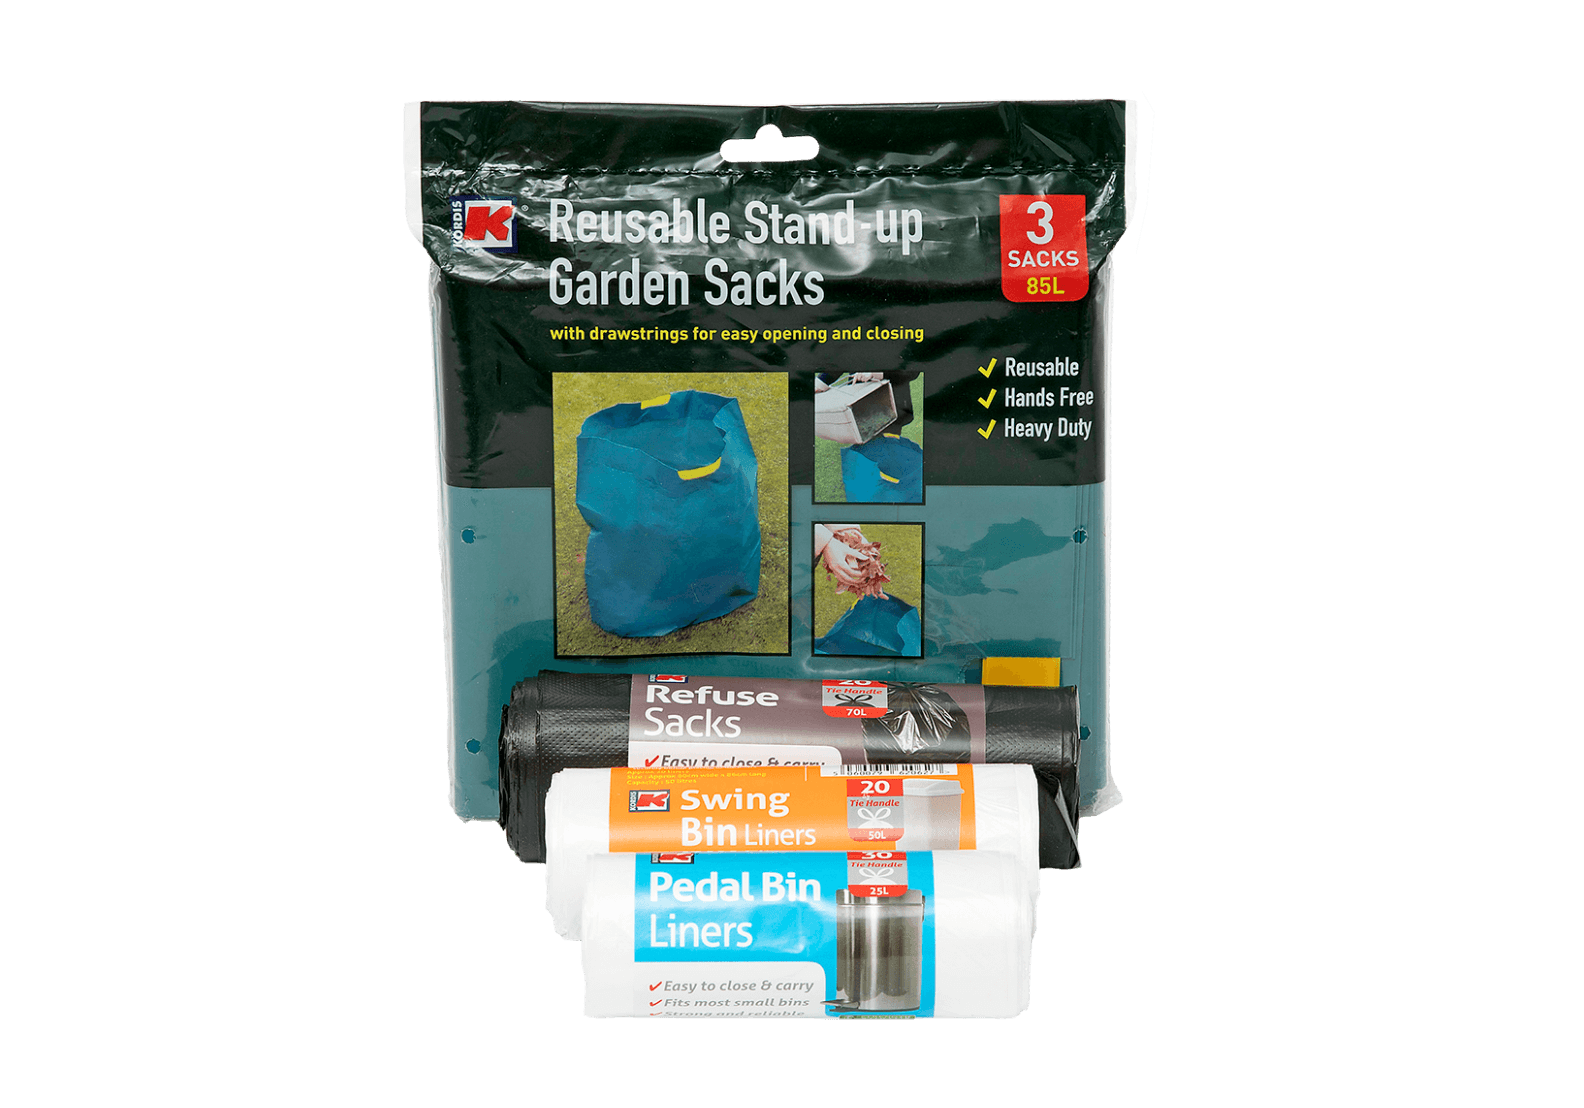 Kordis Bin Liners are strong and thin so they use less material but are just as strong as most major competitors to save money and the environment